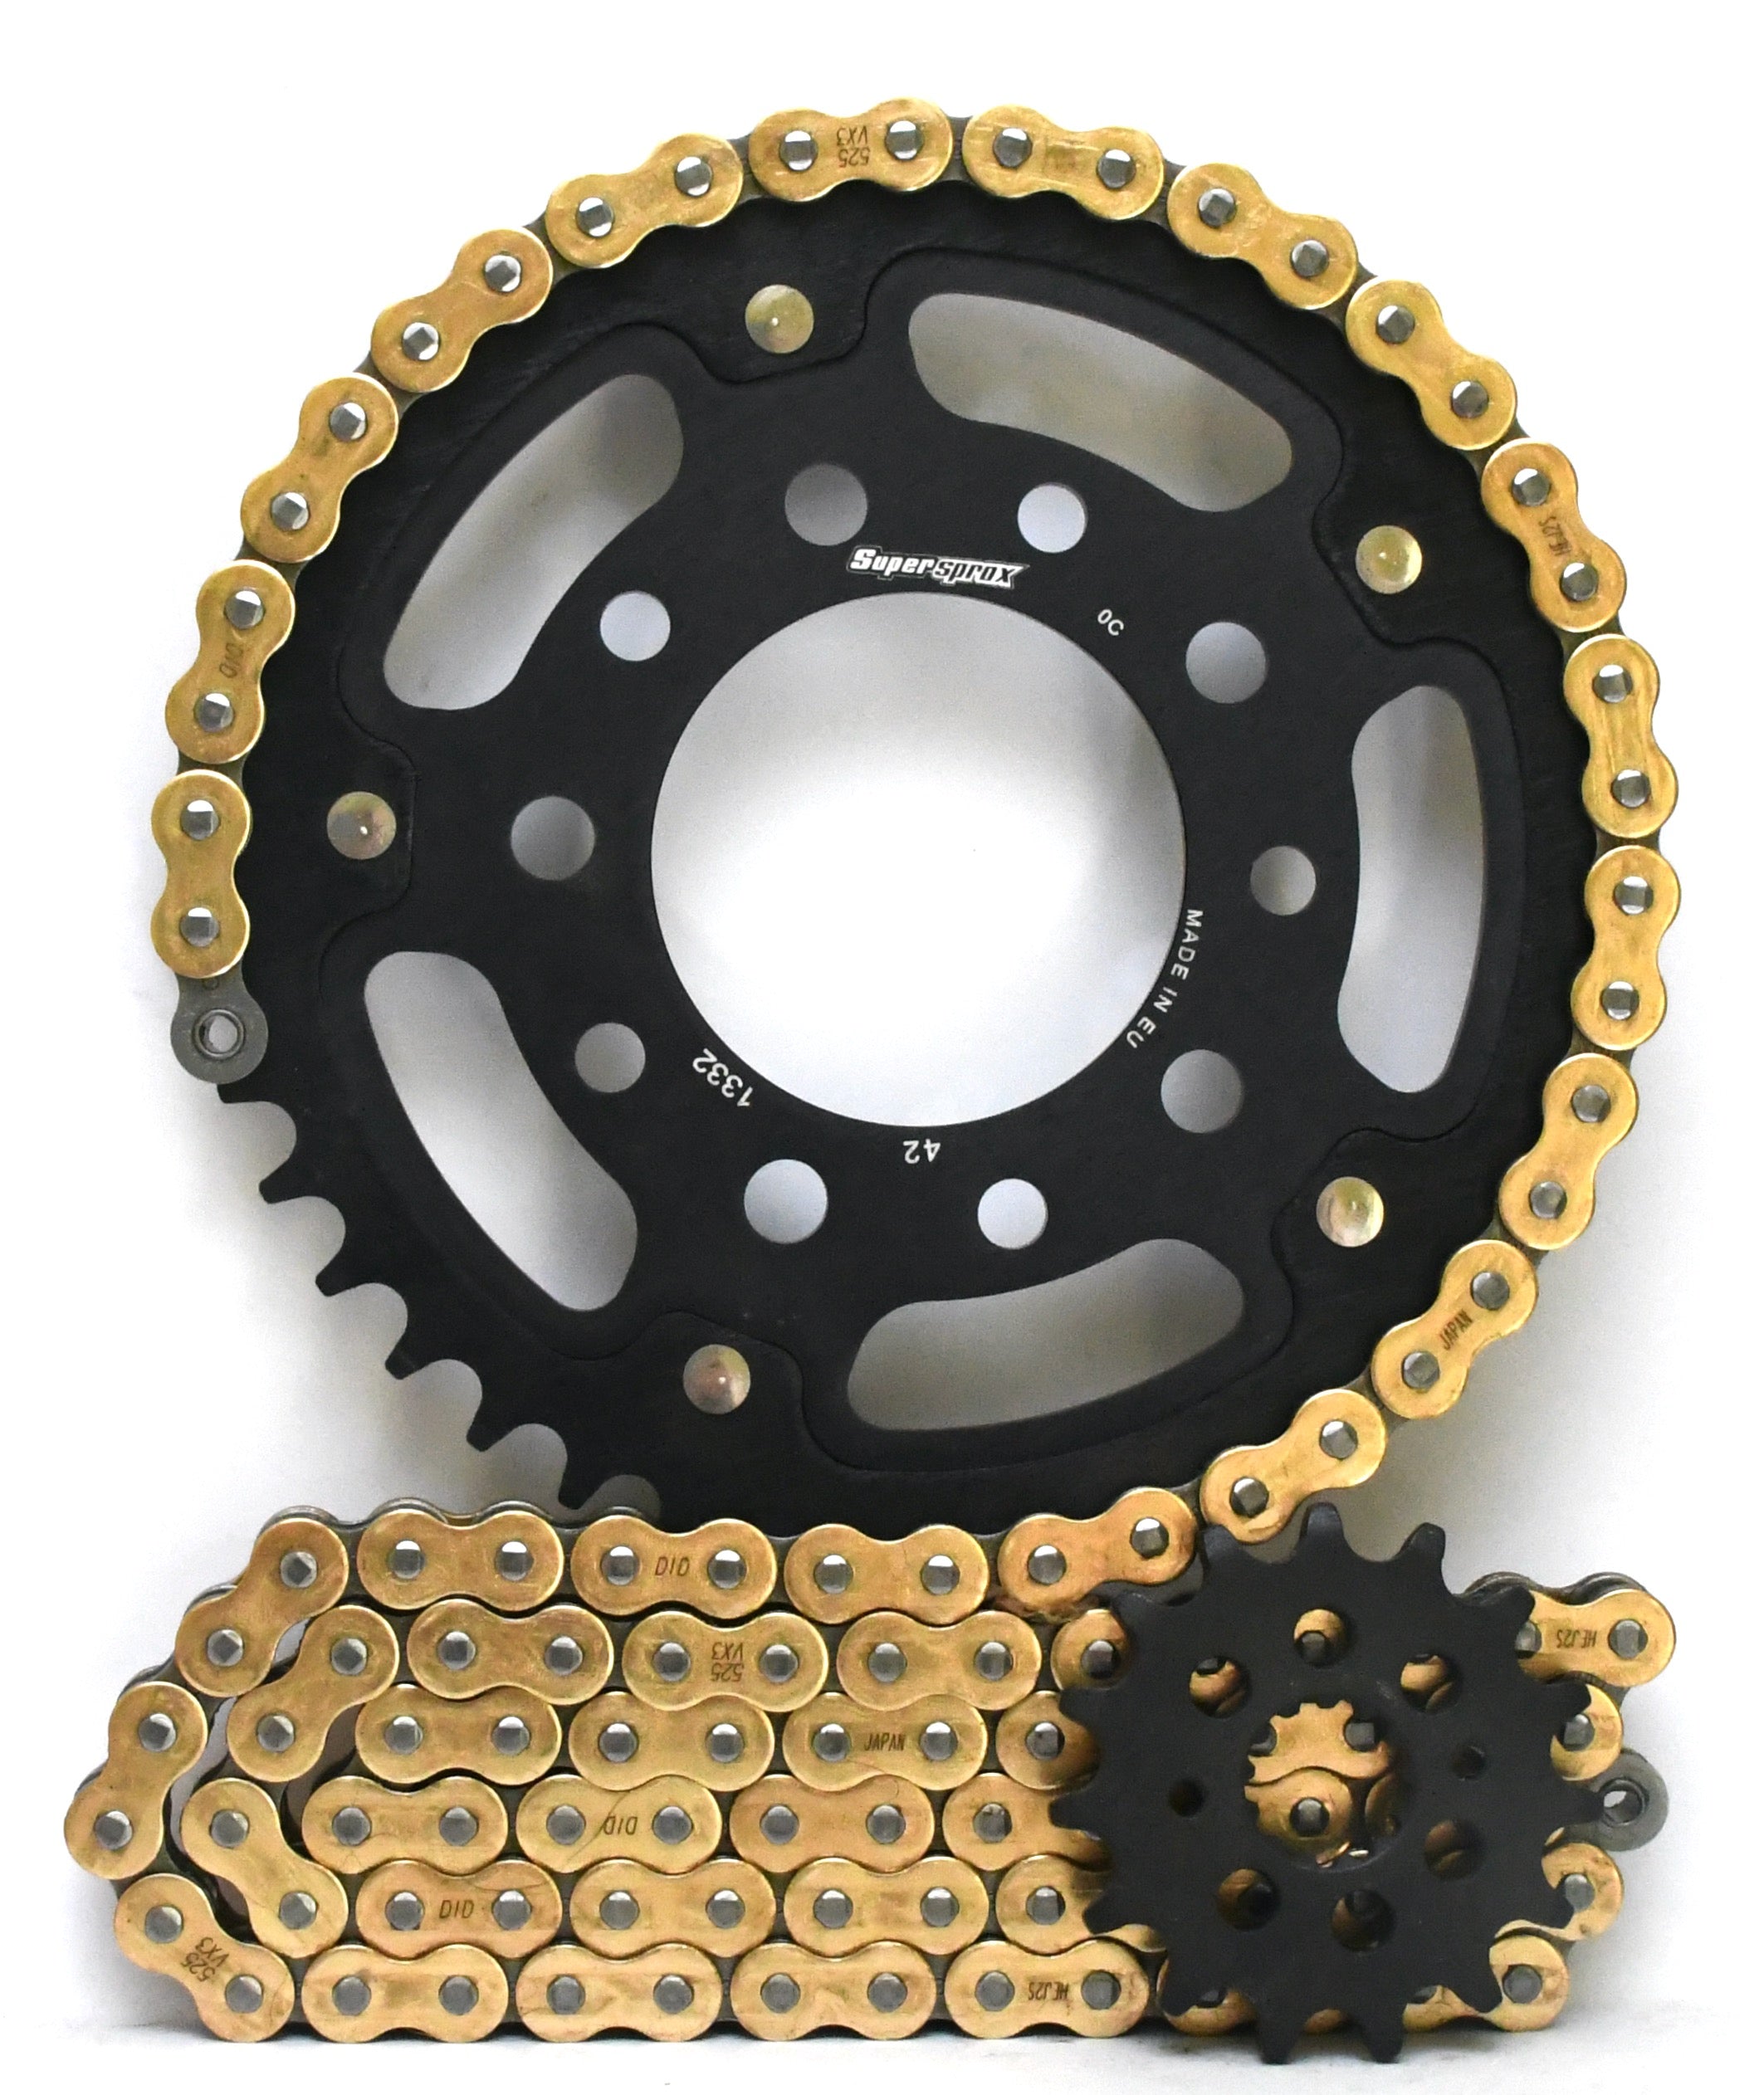 Supersprox Stealth Chain & Sprocket Kit for Triumph America 865 2007-2014 - Standard Gearing - 0